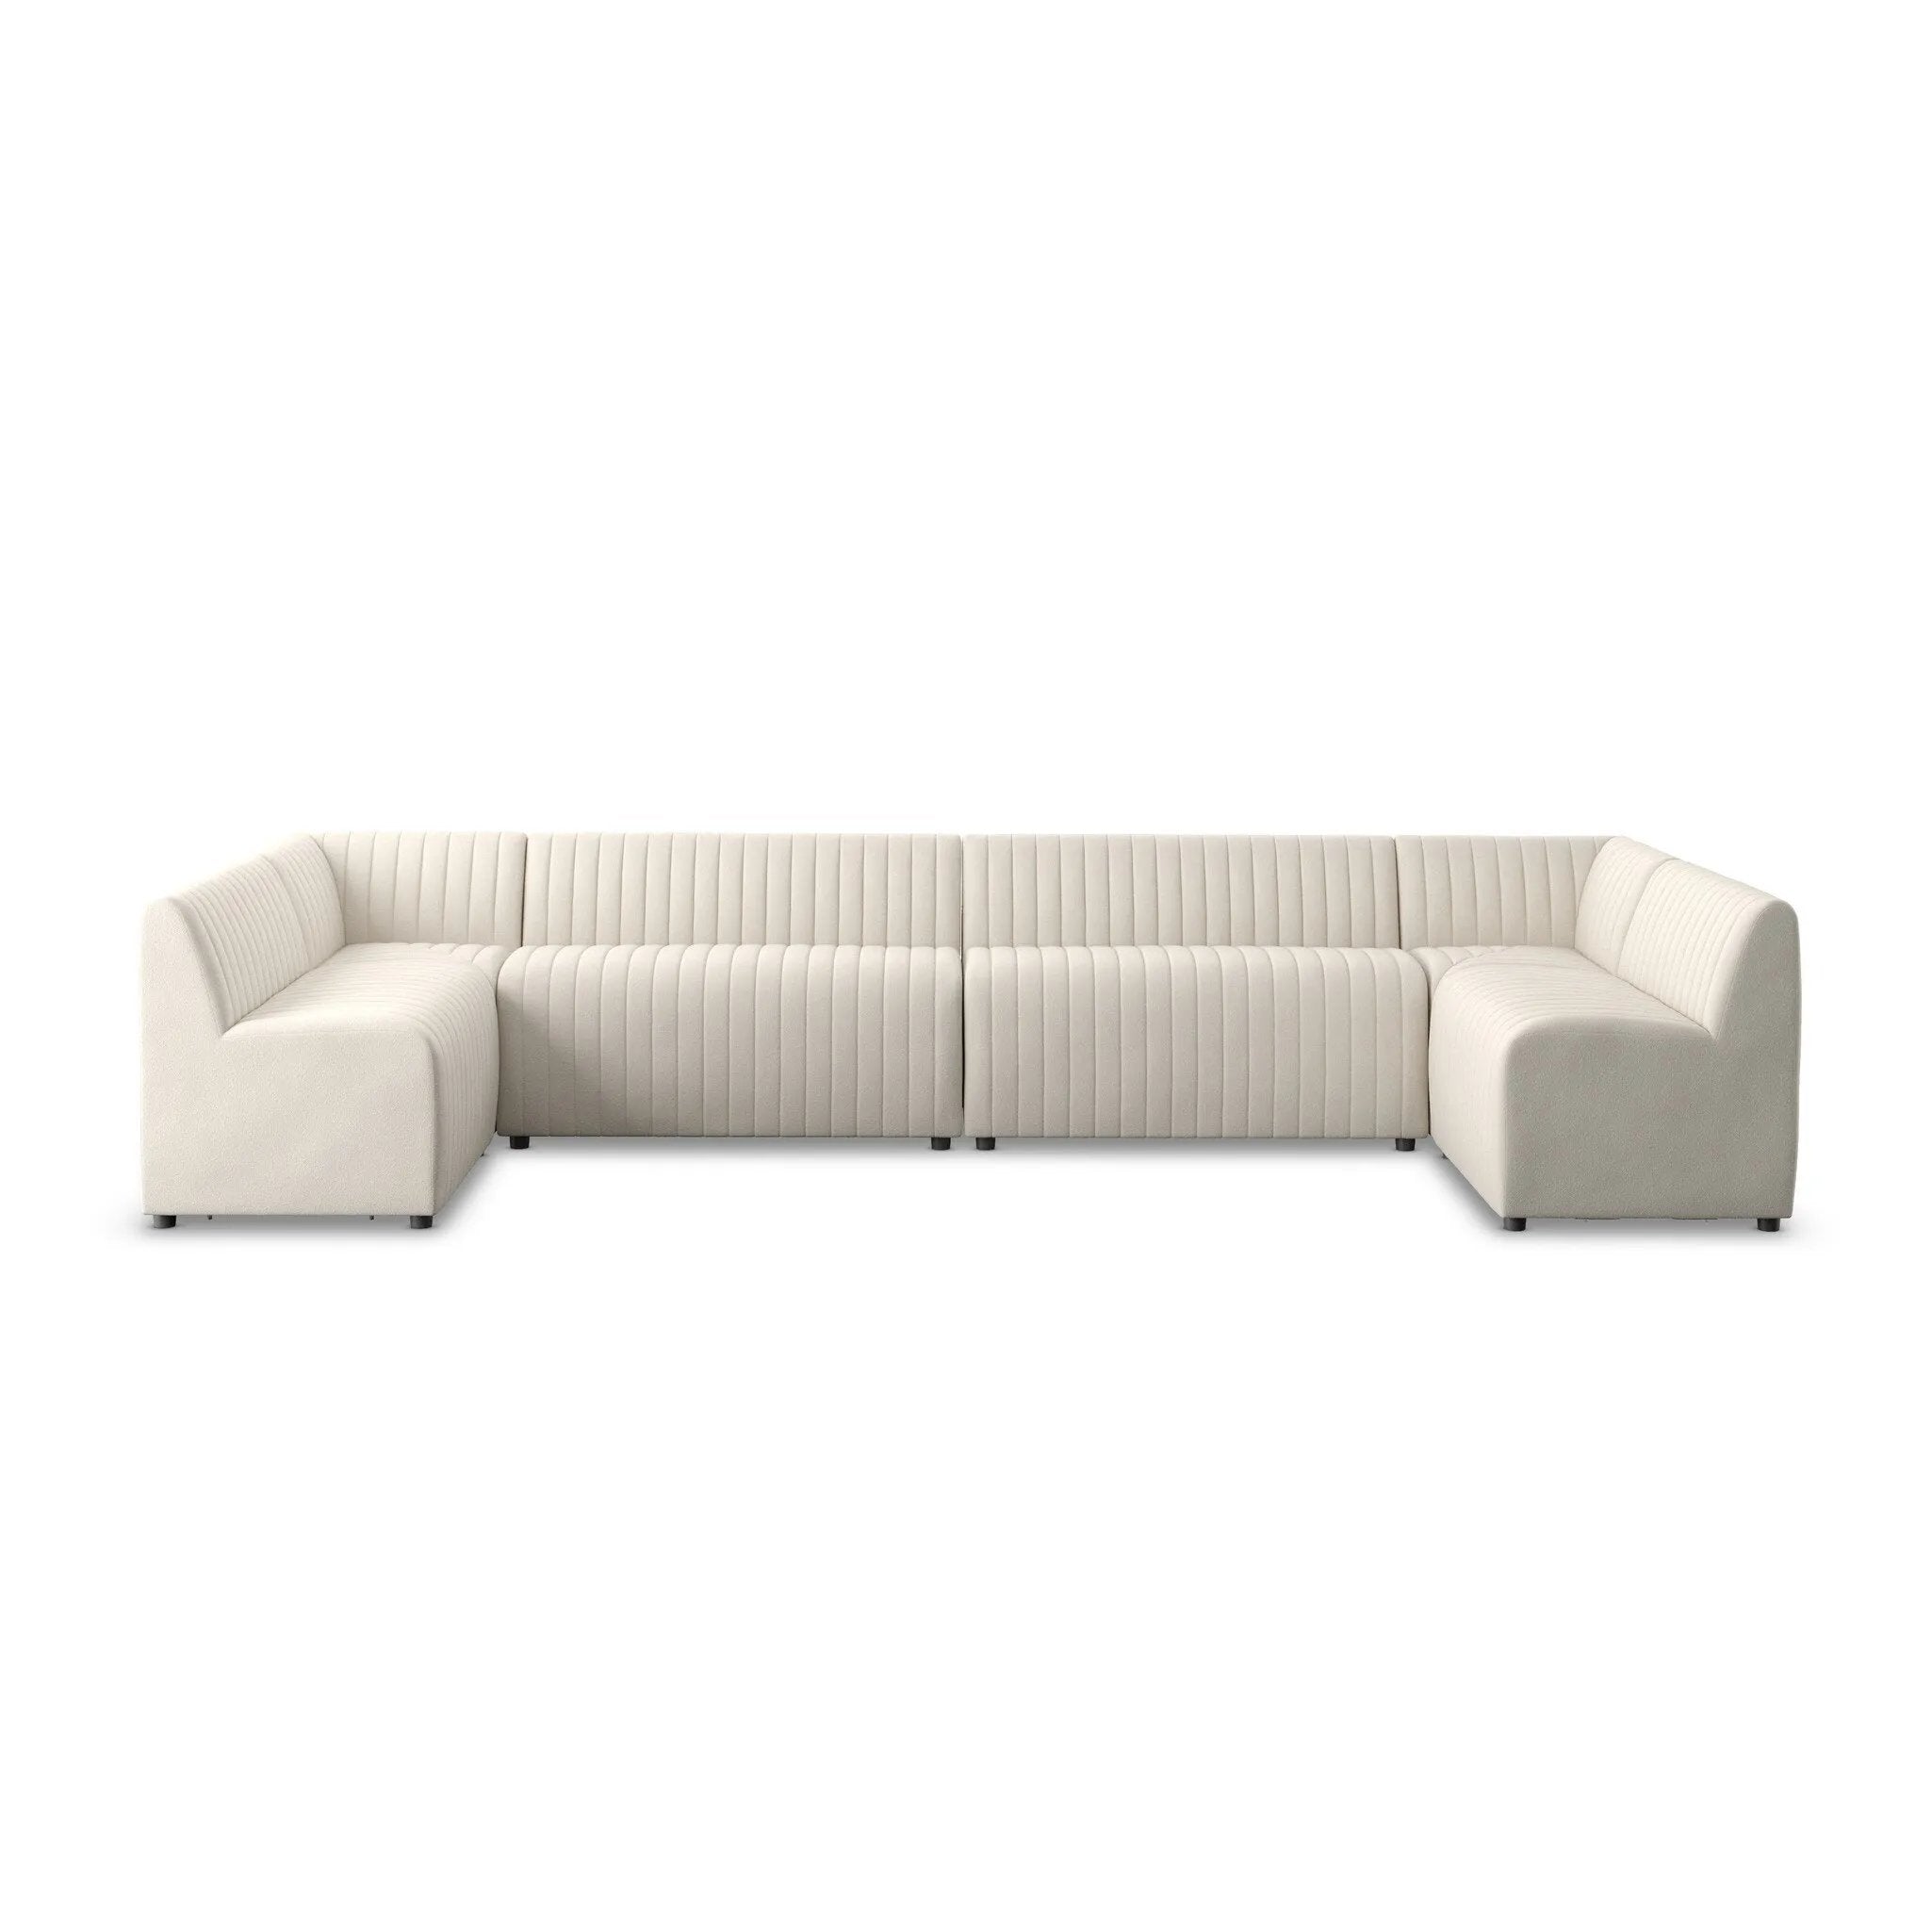 High-performance fabric in a versatile oatmeal hue features dramatic channeling, for trend-forward texture and sumptuous sit. Option to pair with matching pieces for clever modularity.Overall Dimensions154.00"w x 66.50"d x 31.50"hFull Details &amp; SpecificationsTear SheetBack Cushion Attachment : Fixe Amethyst Home provides interior design, new home construction design consulting, vintage area rugs, and lighting in the Miami metro area.